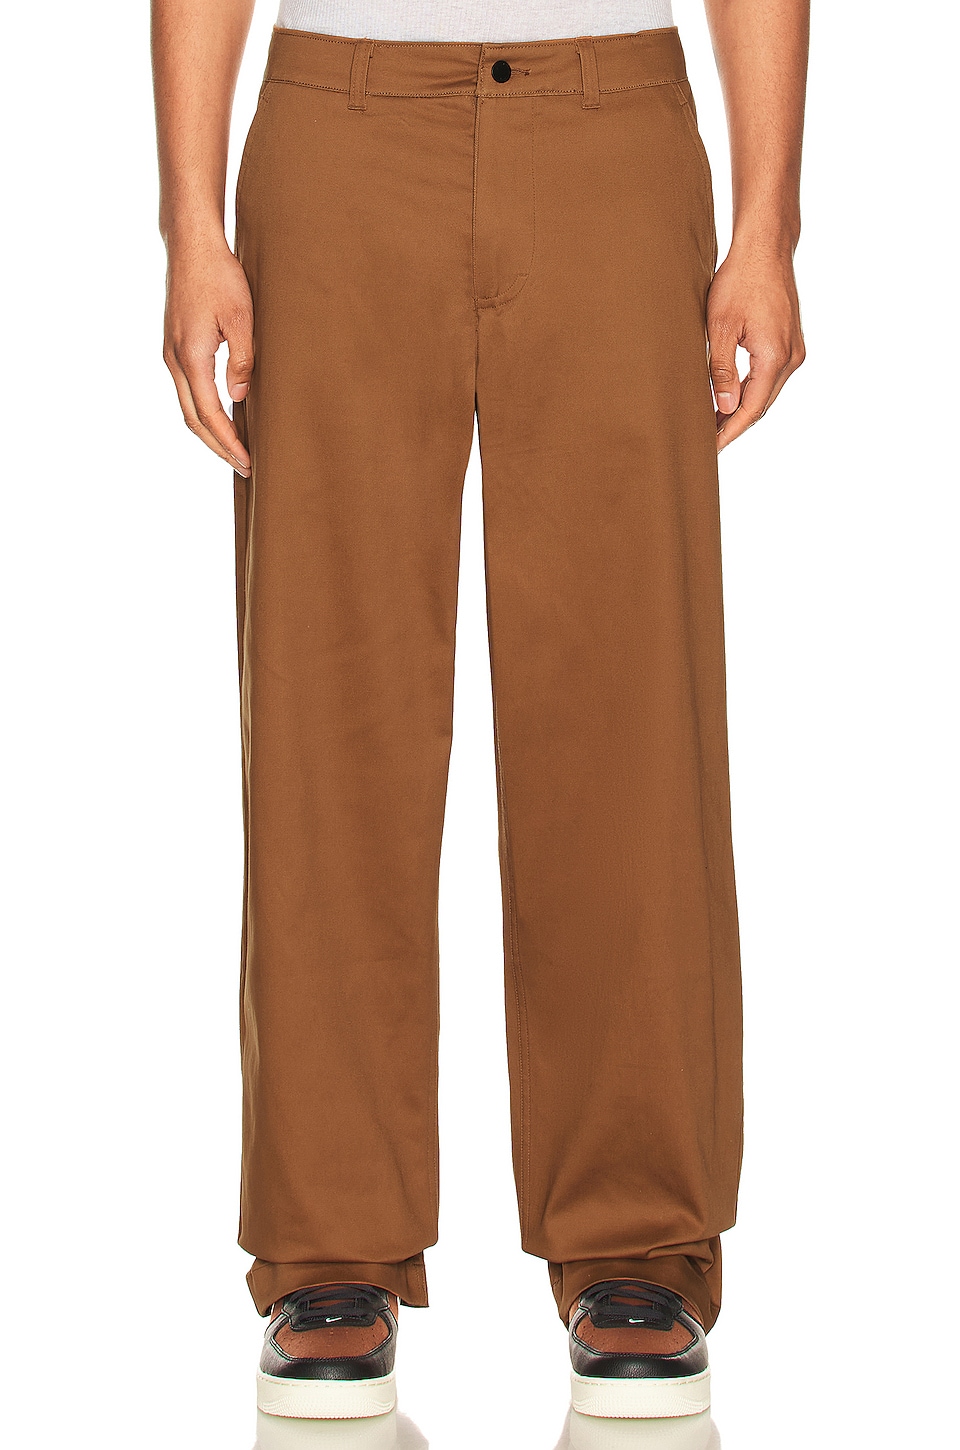 Nike M Nl El Chino Pant Ul Cotton in Ale Brown/White | REVOLVE